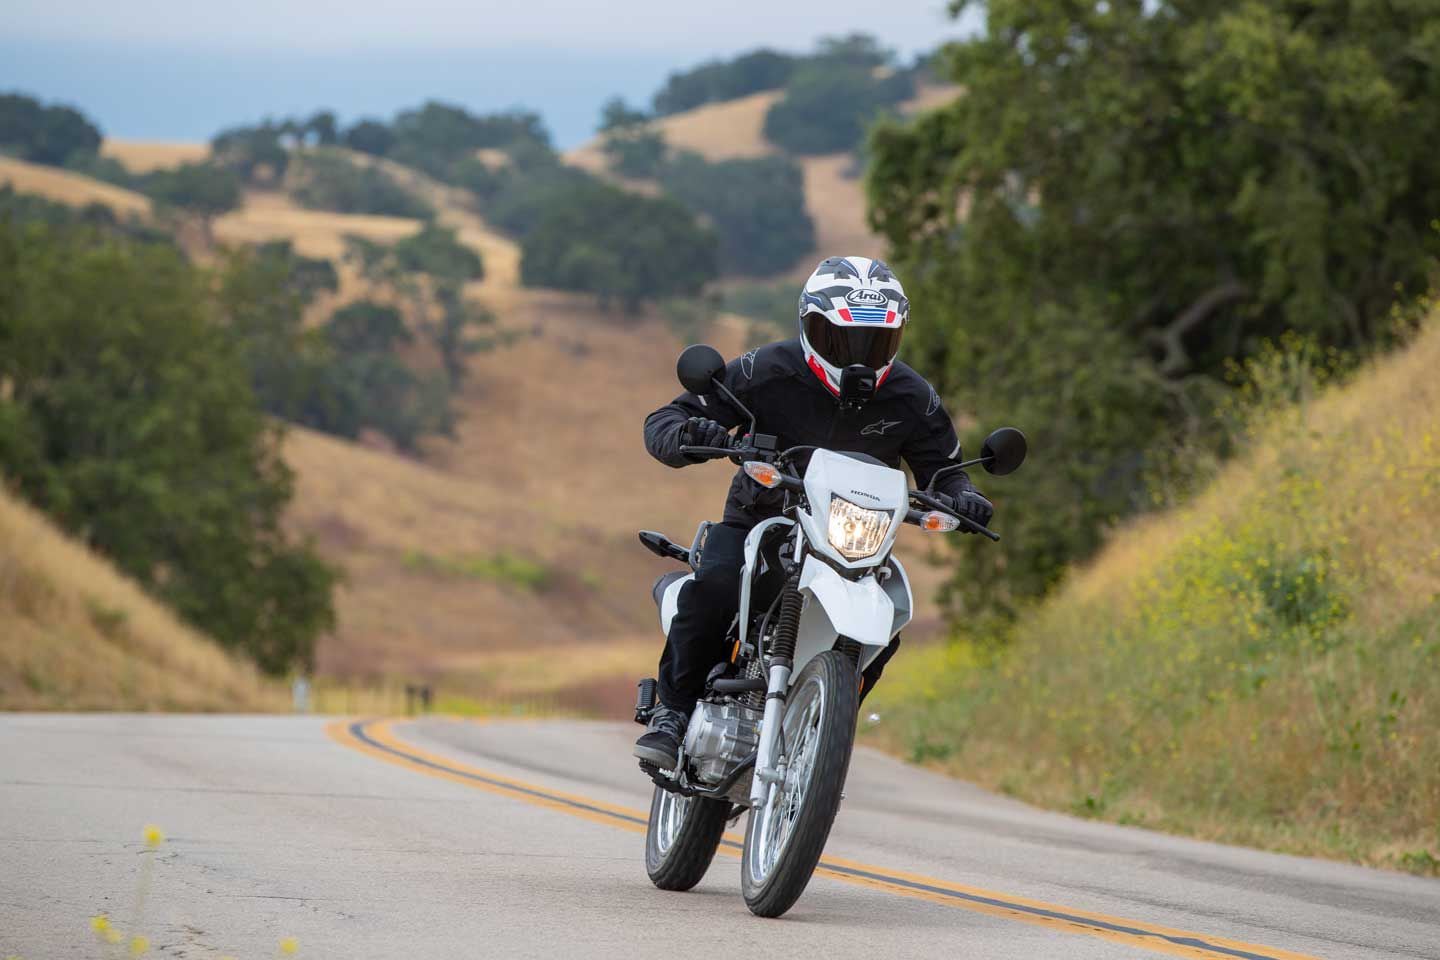 On the open highway the Honda XR150L can comfortably cruise north of 60 mph.